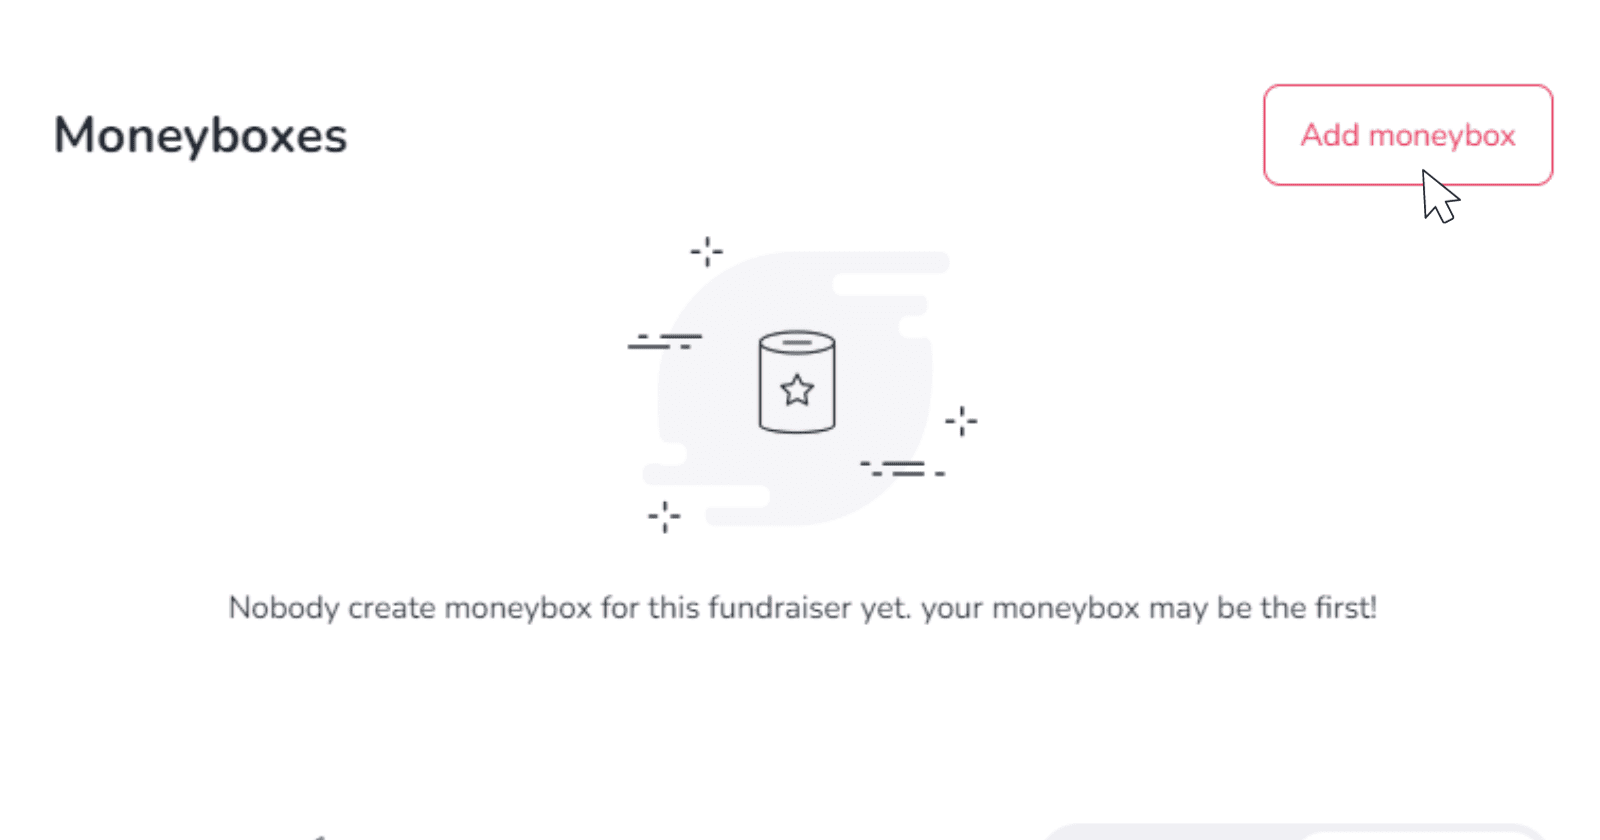 Picture shows moneybox feature on 4fund.com